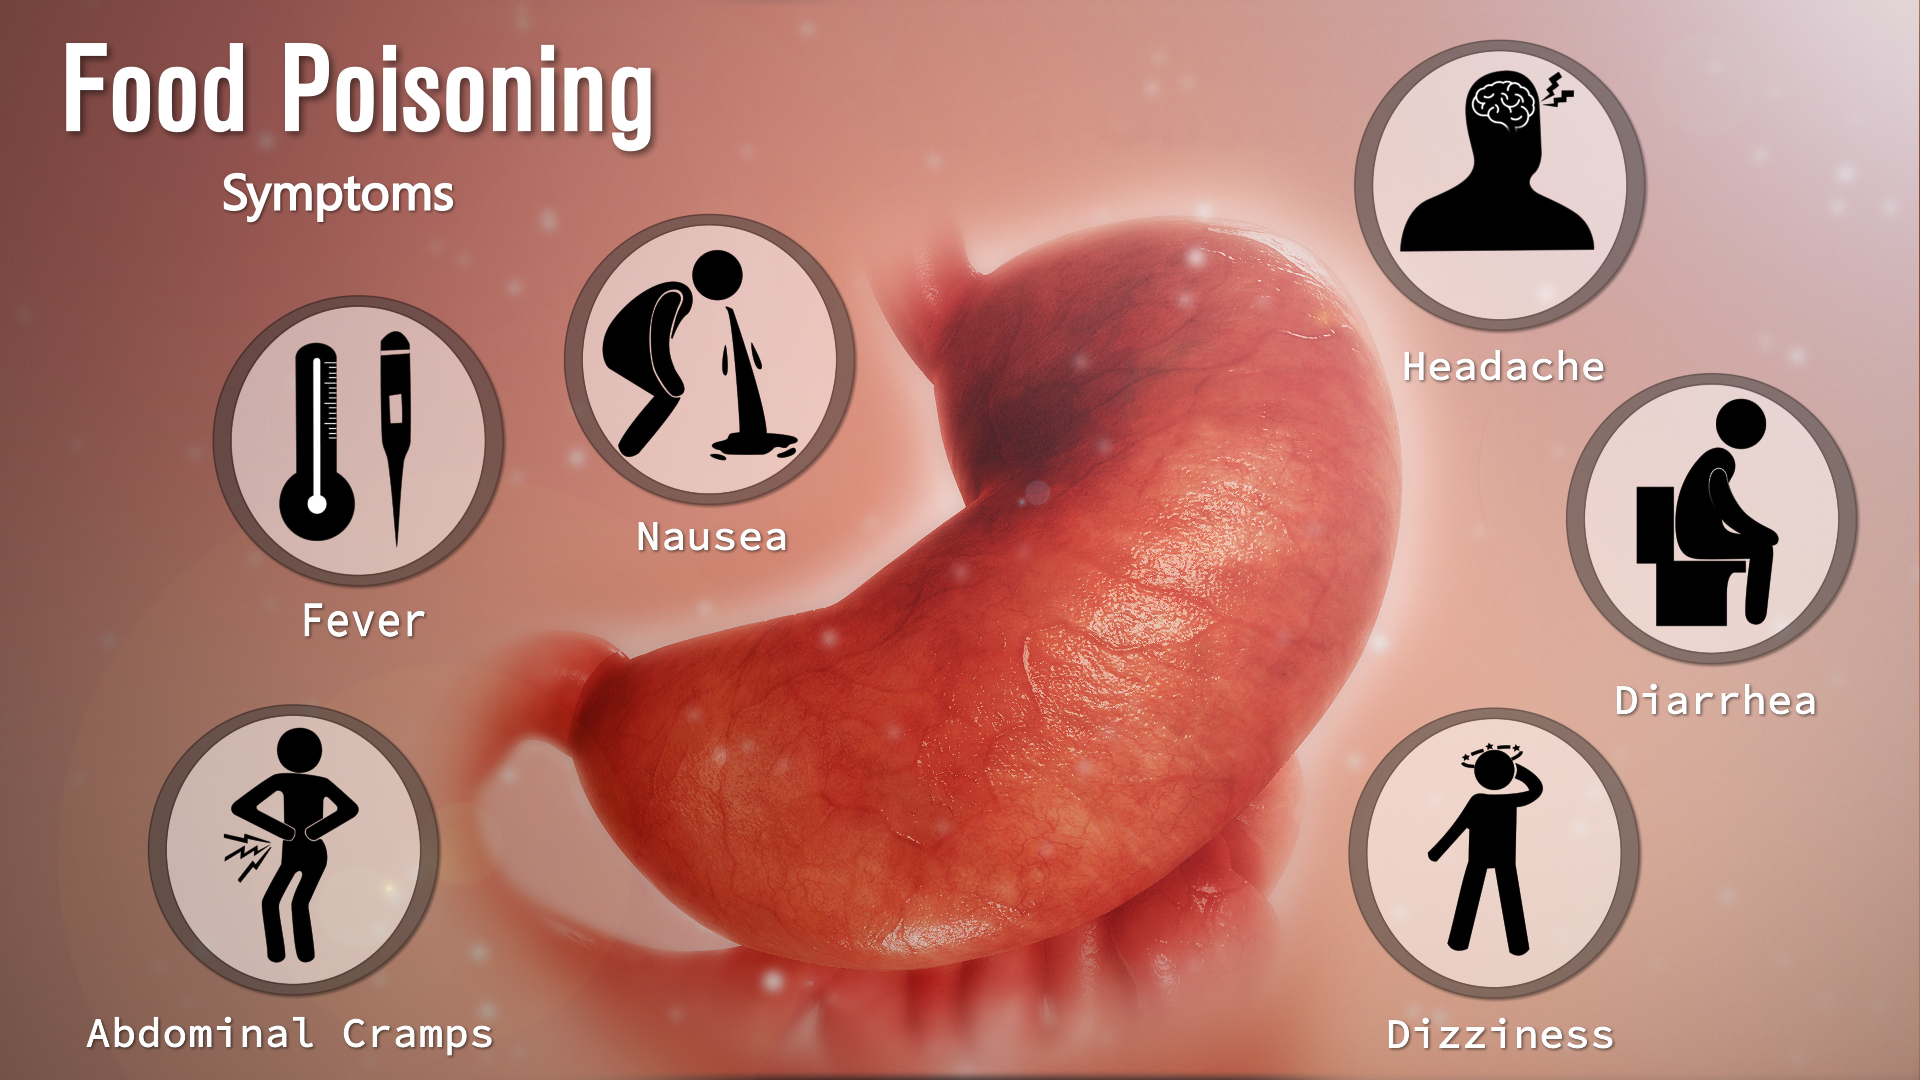 Medical Animation Showing Symptoms Of Food Poisoning